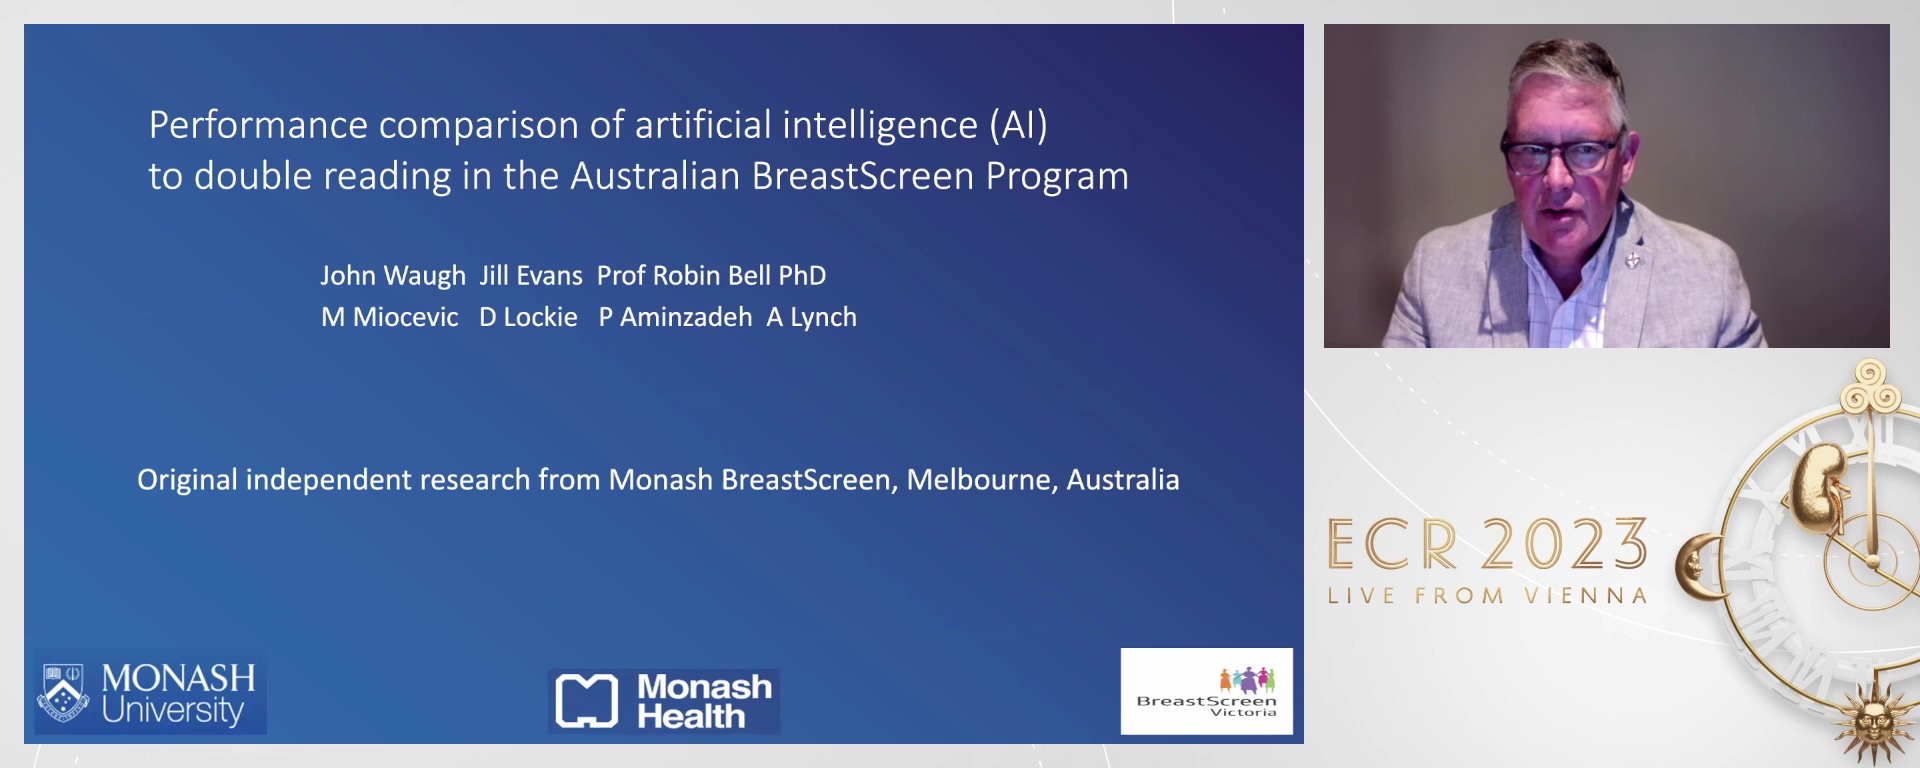 Performance comparison of artificial intelligence (AI) to double reading in the Australian BreastScreen Program